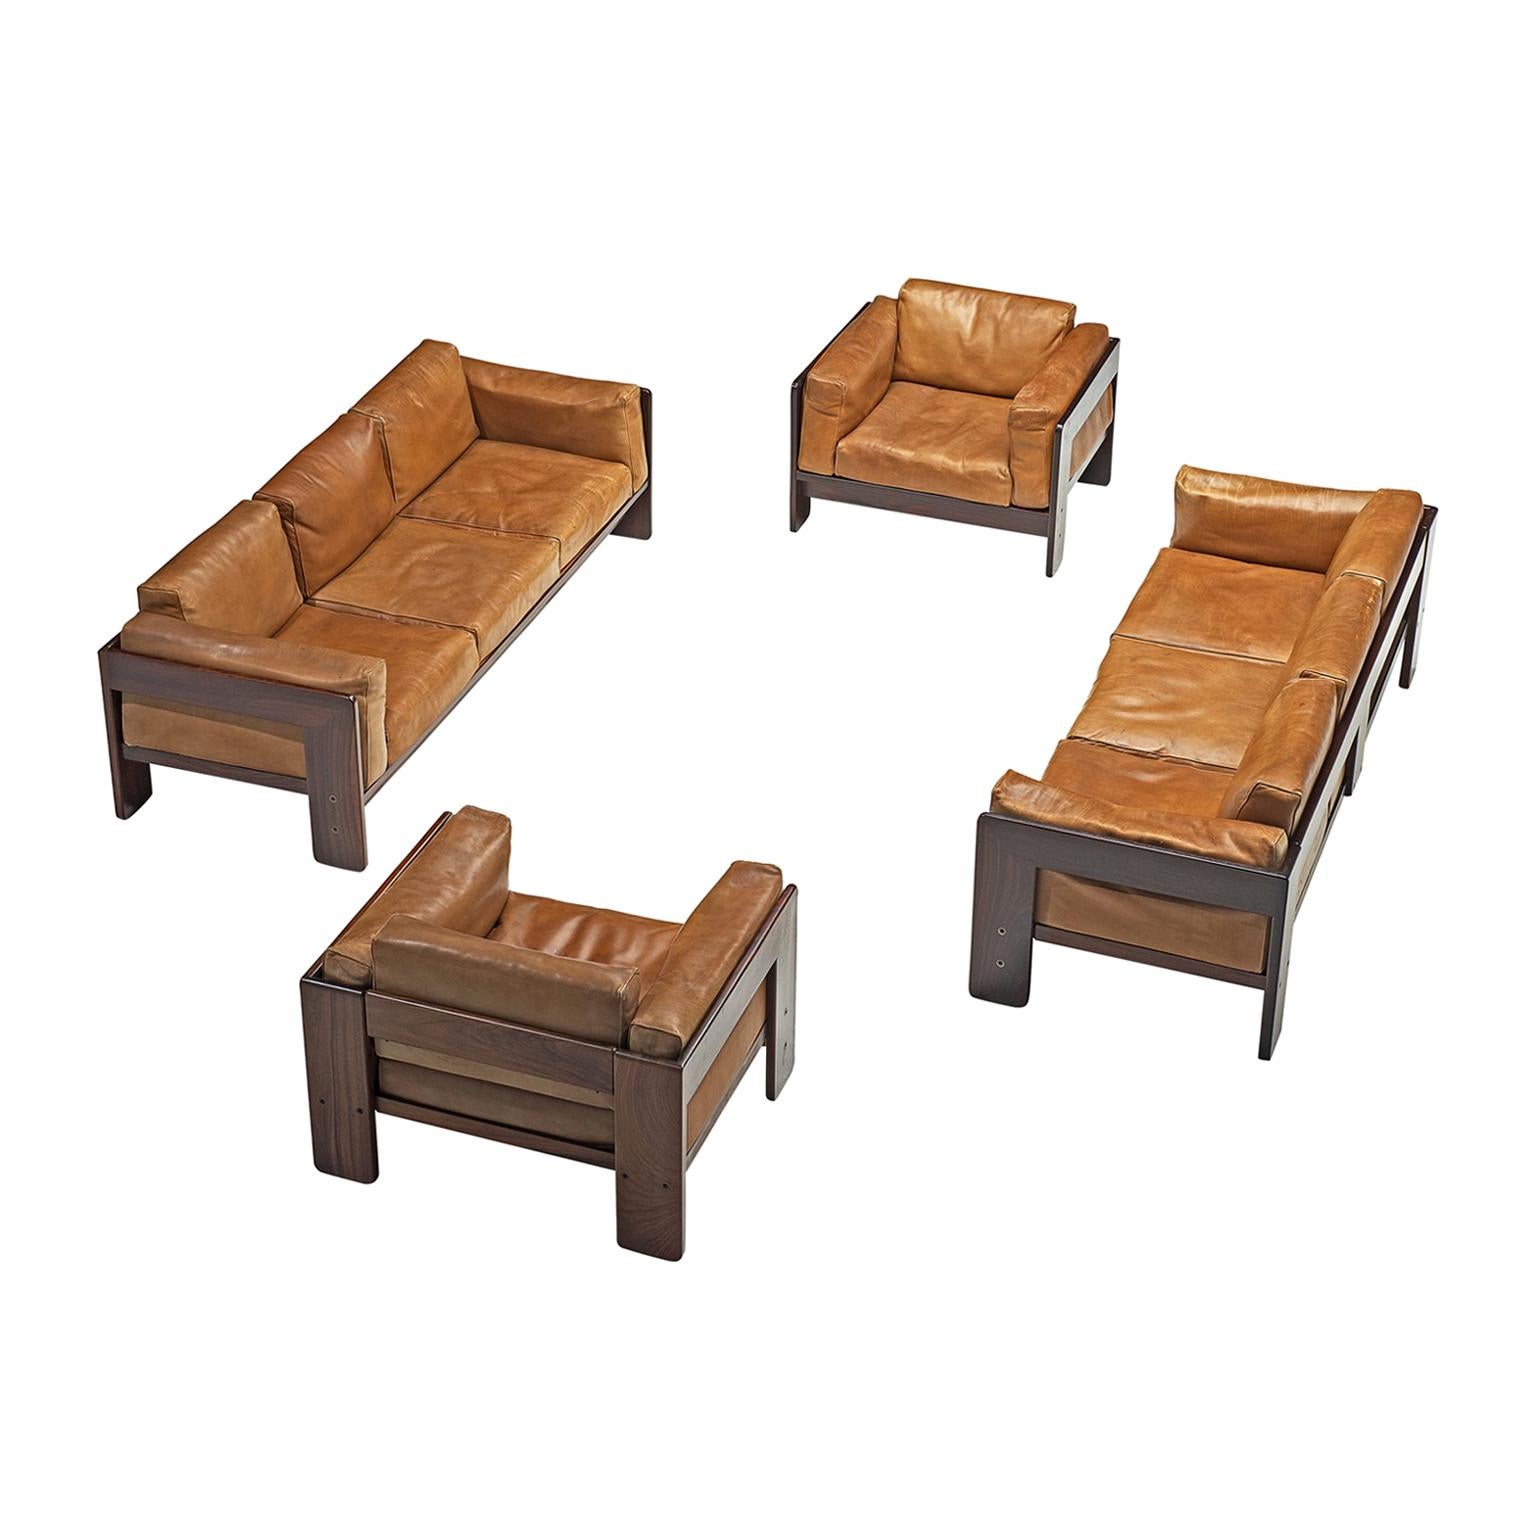 Tobia Scarpa 'Bastiano' Living Room Set in Rosewood and Cognac Leather